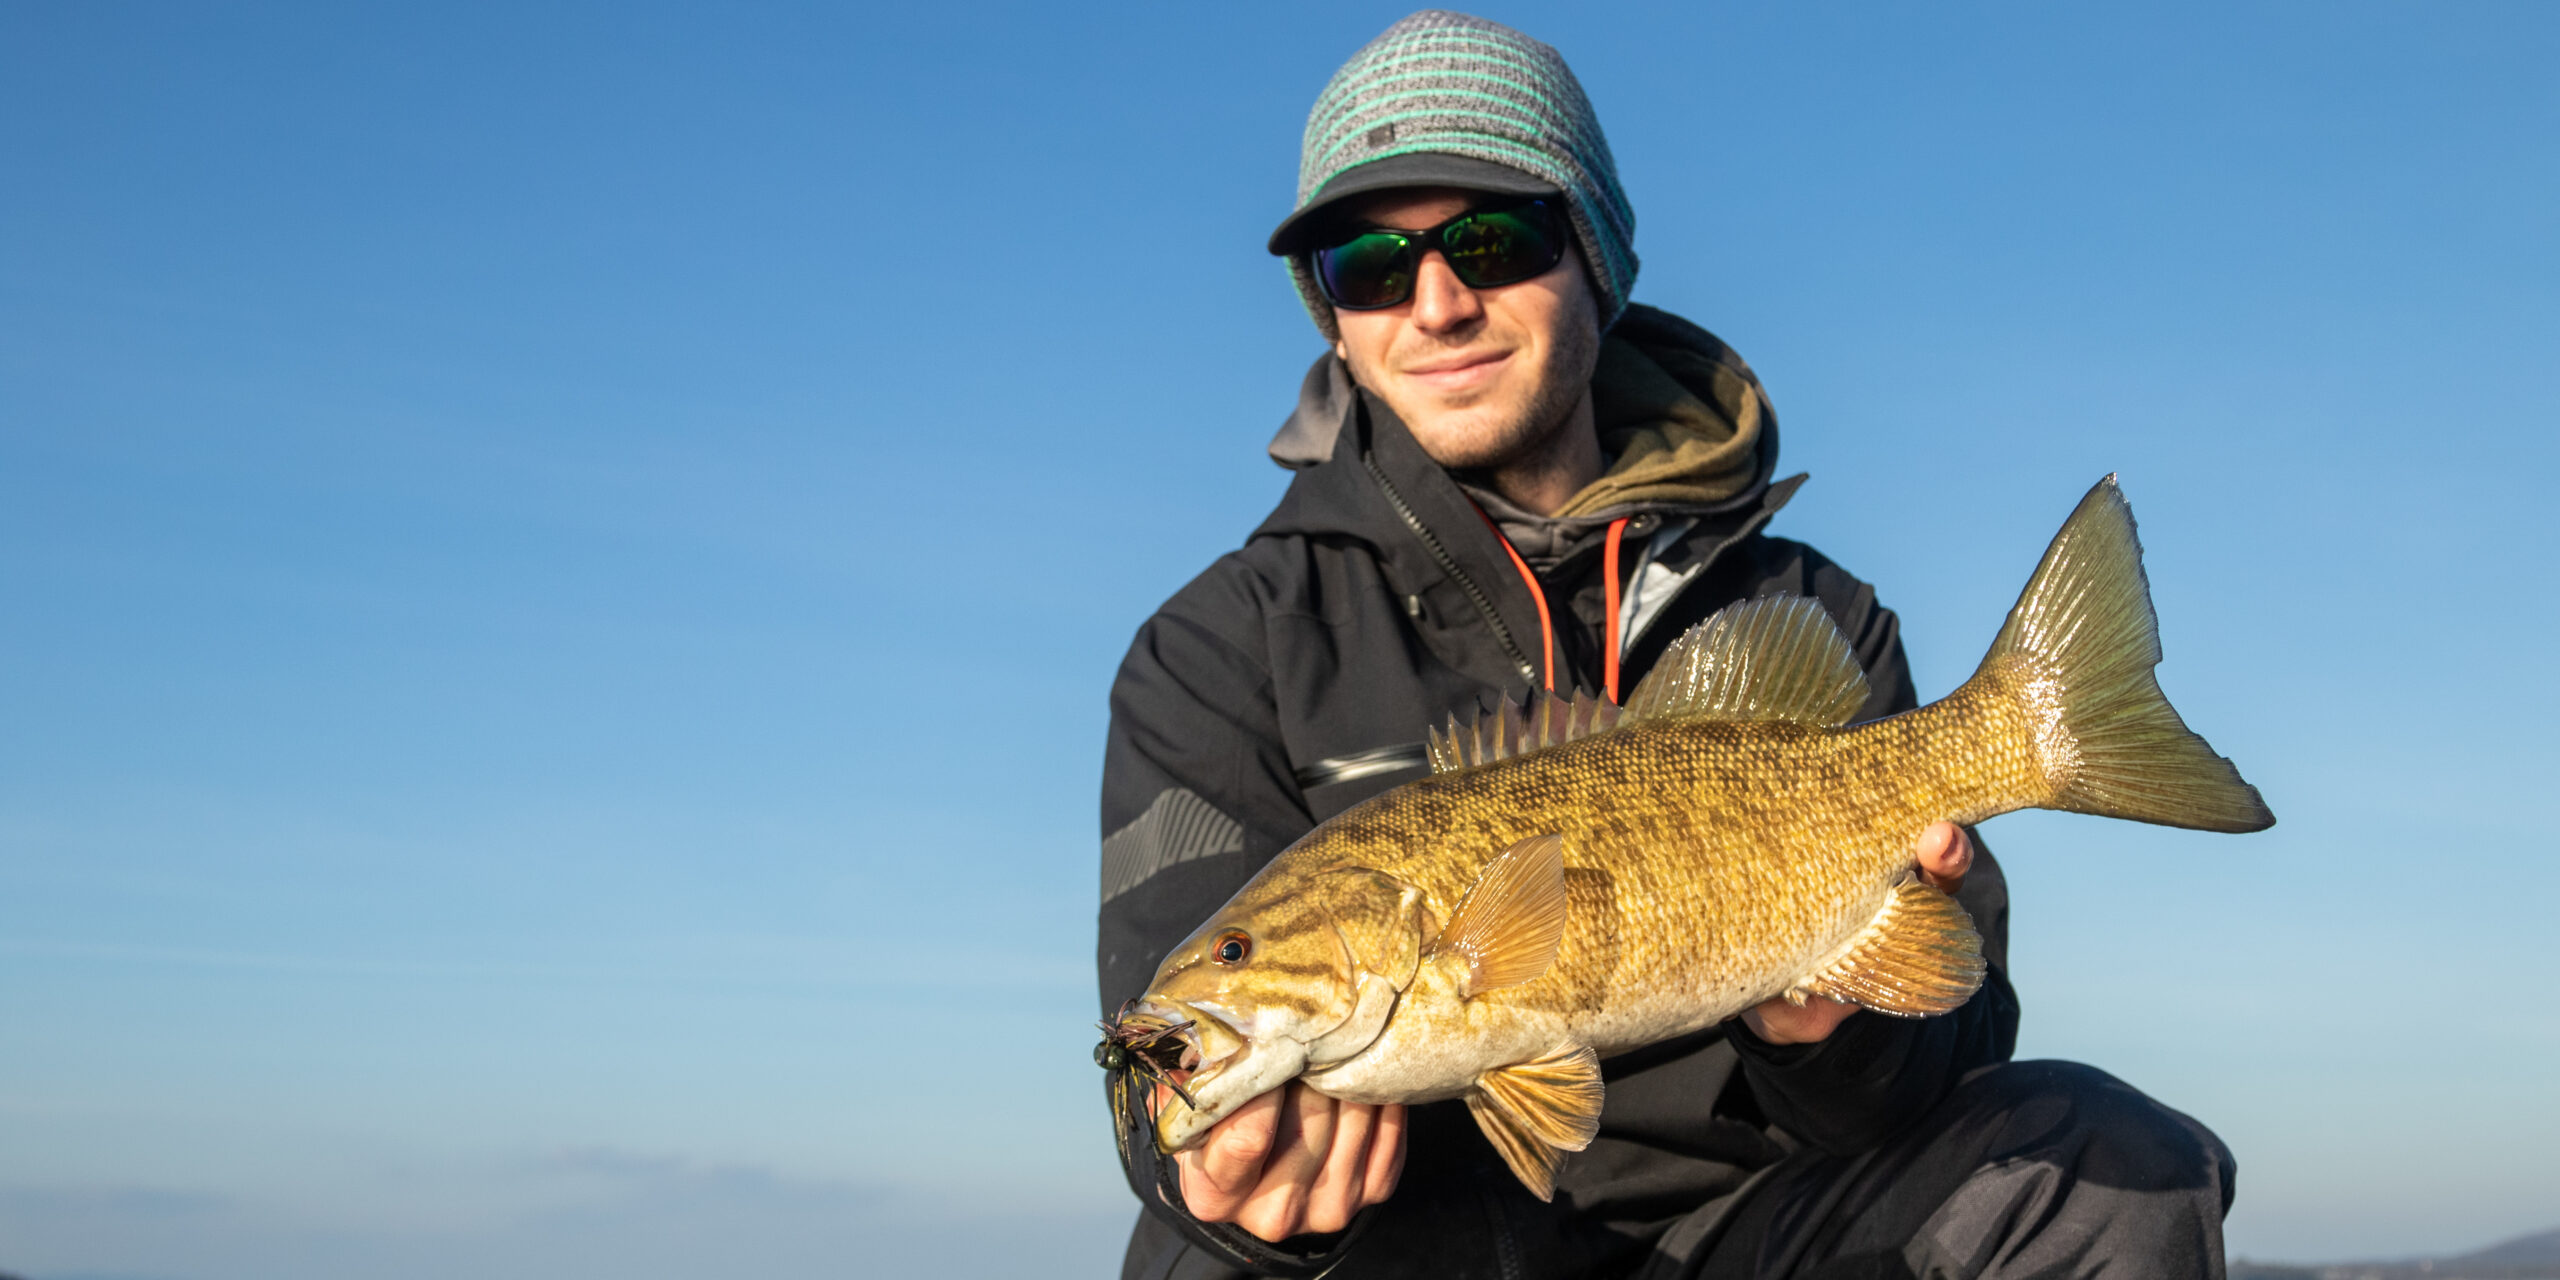 Old-fashioned Ice Fishing Still Puts Fish on the Plate - MidWest Outdoors